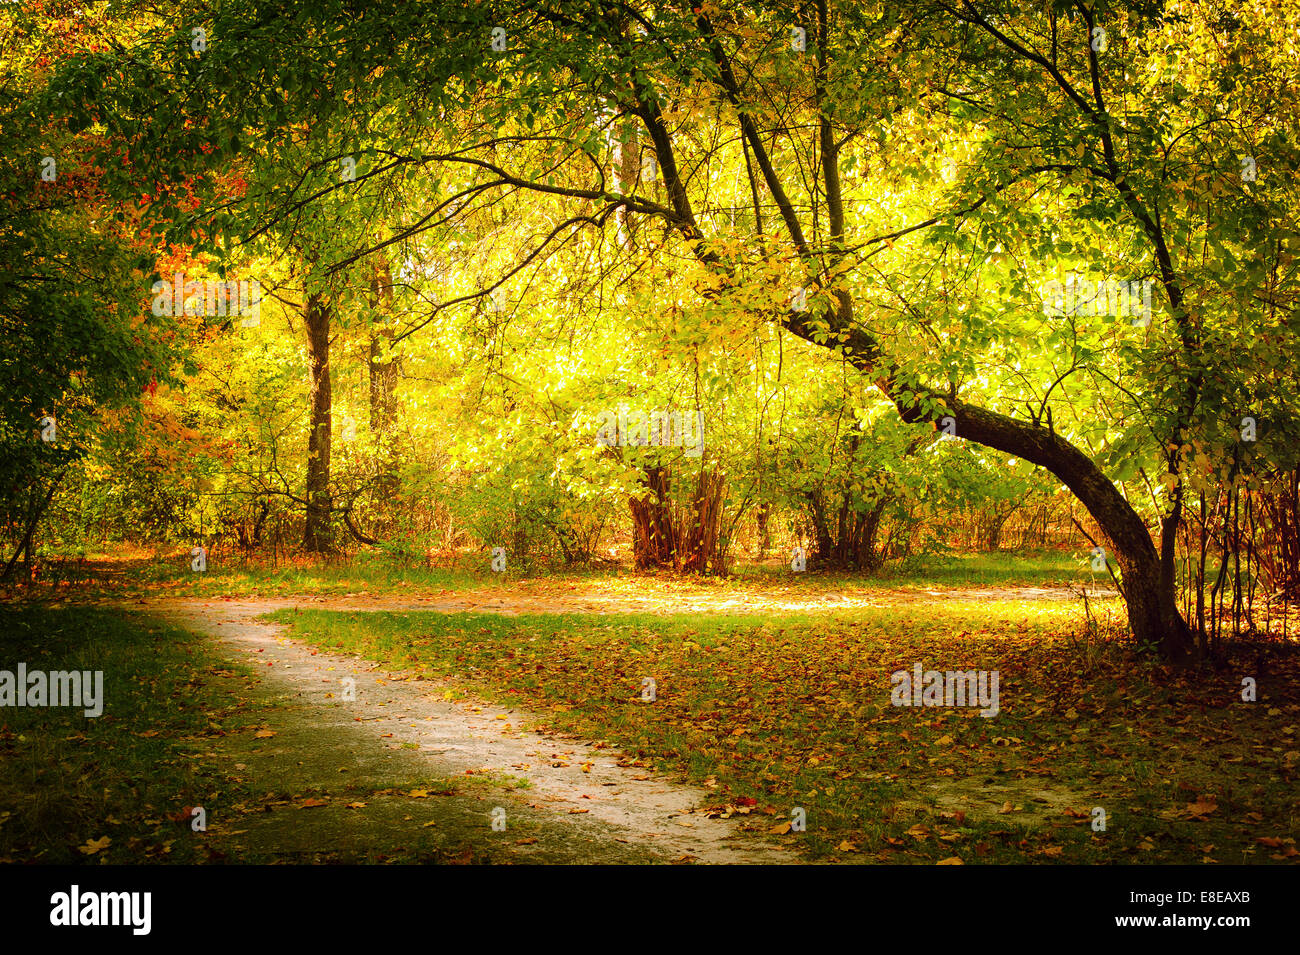 Sunny day in outdoor park with colorful autumn trees and pathway. Amazing bright colors of autumn nature landscape Stock Photo